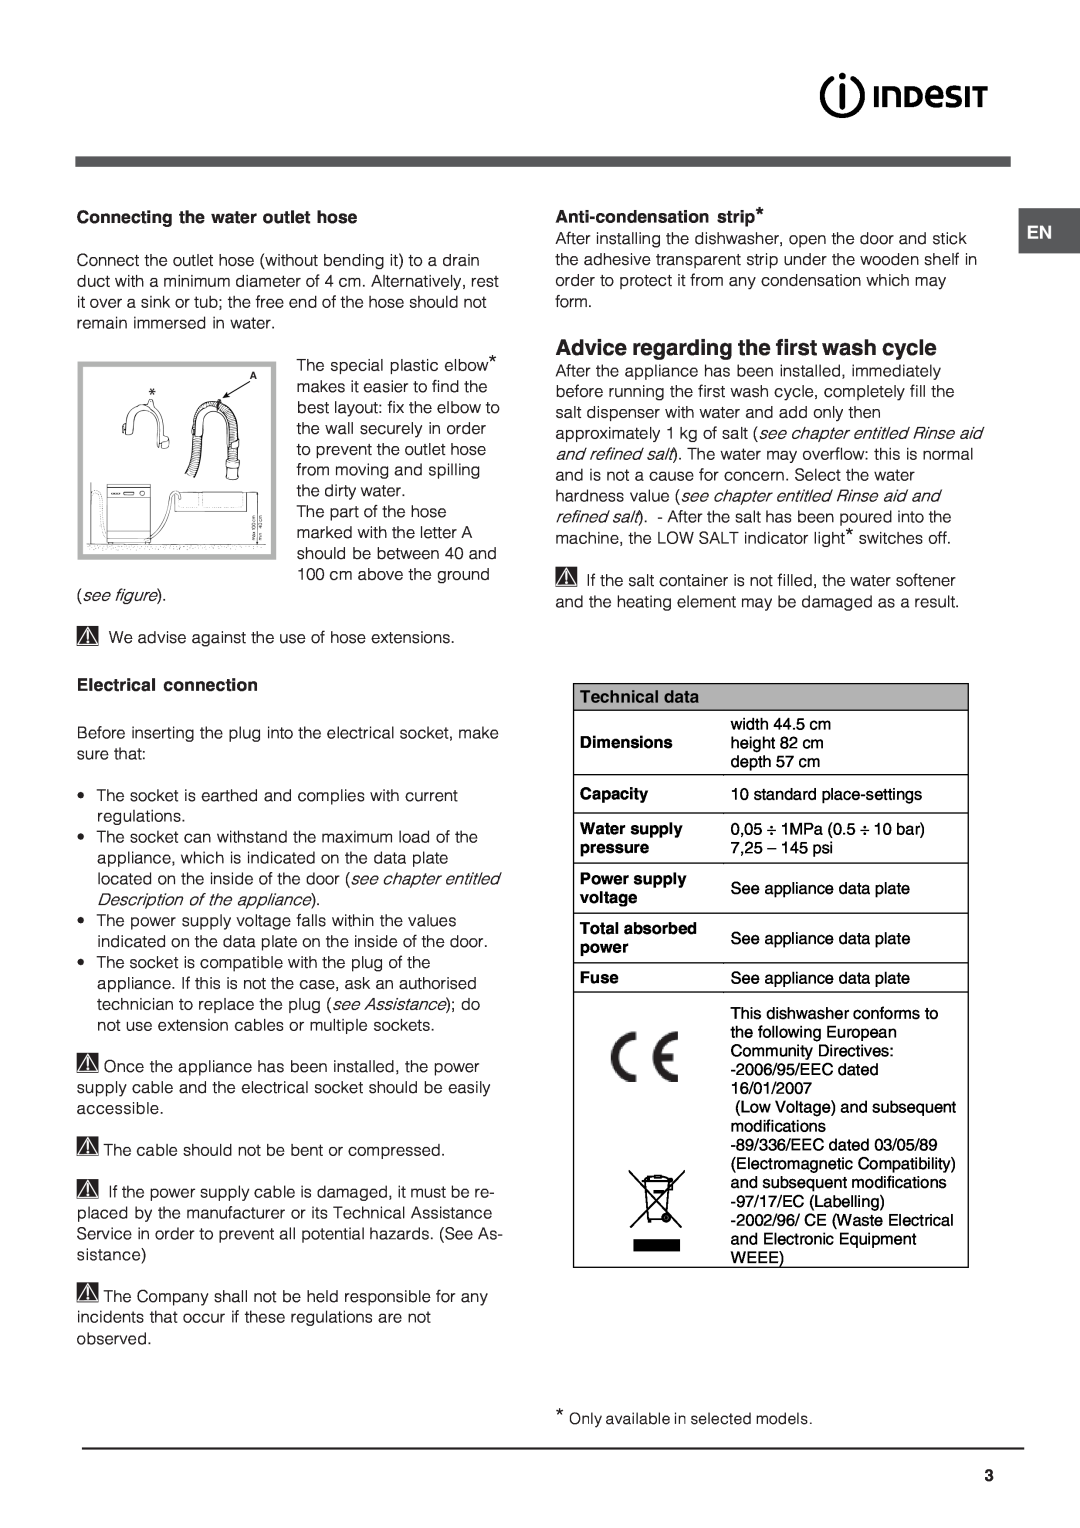 Indesit DIS 04 operating instructions Advice regarding the first wash cycle, Technical data, see figure 